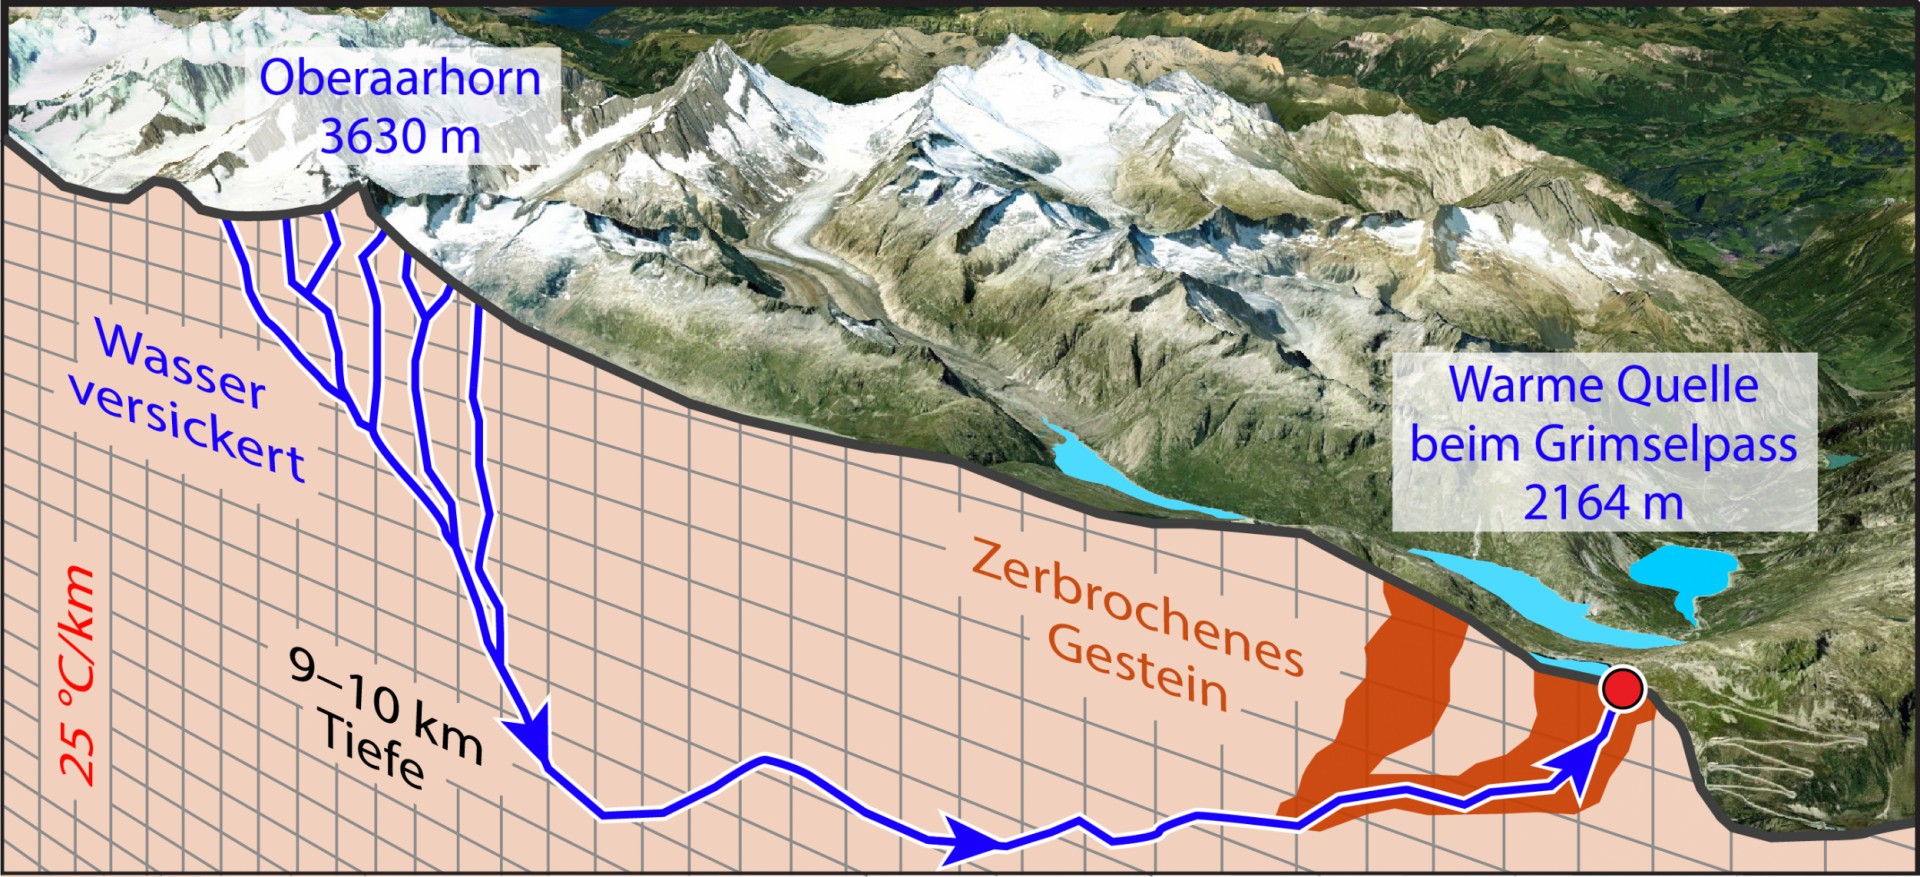 Schematic diagram of the underground flow paths of thermal water at the Grimsel Pass.